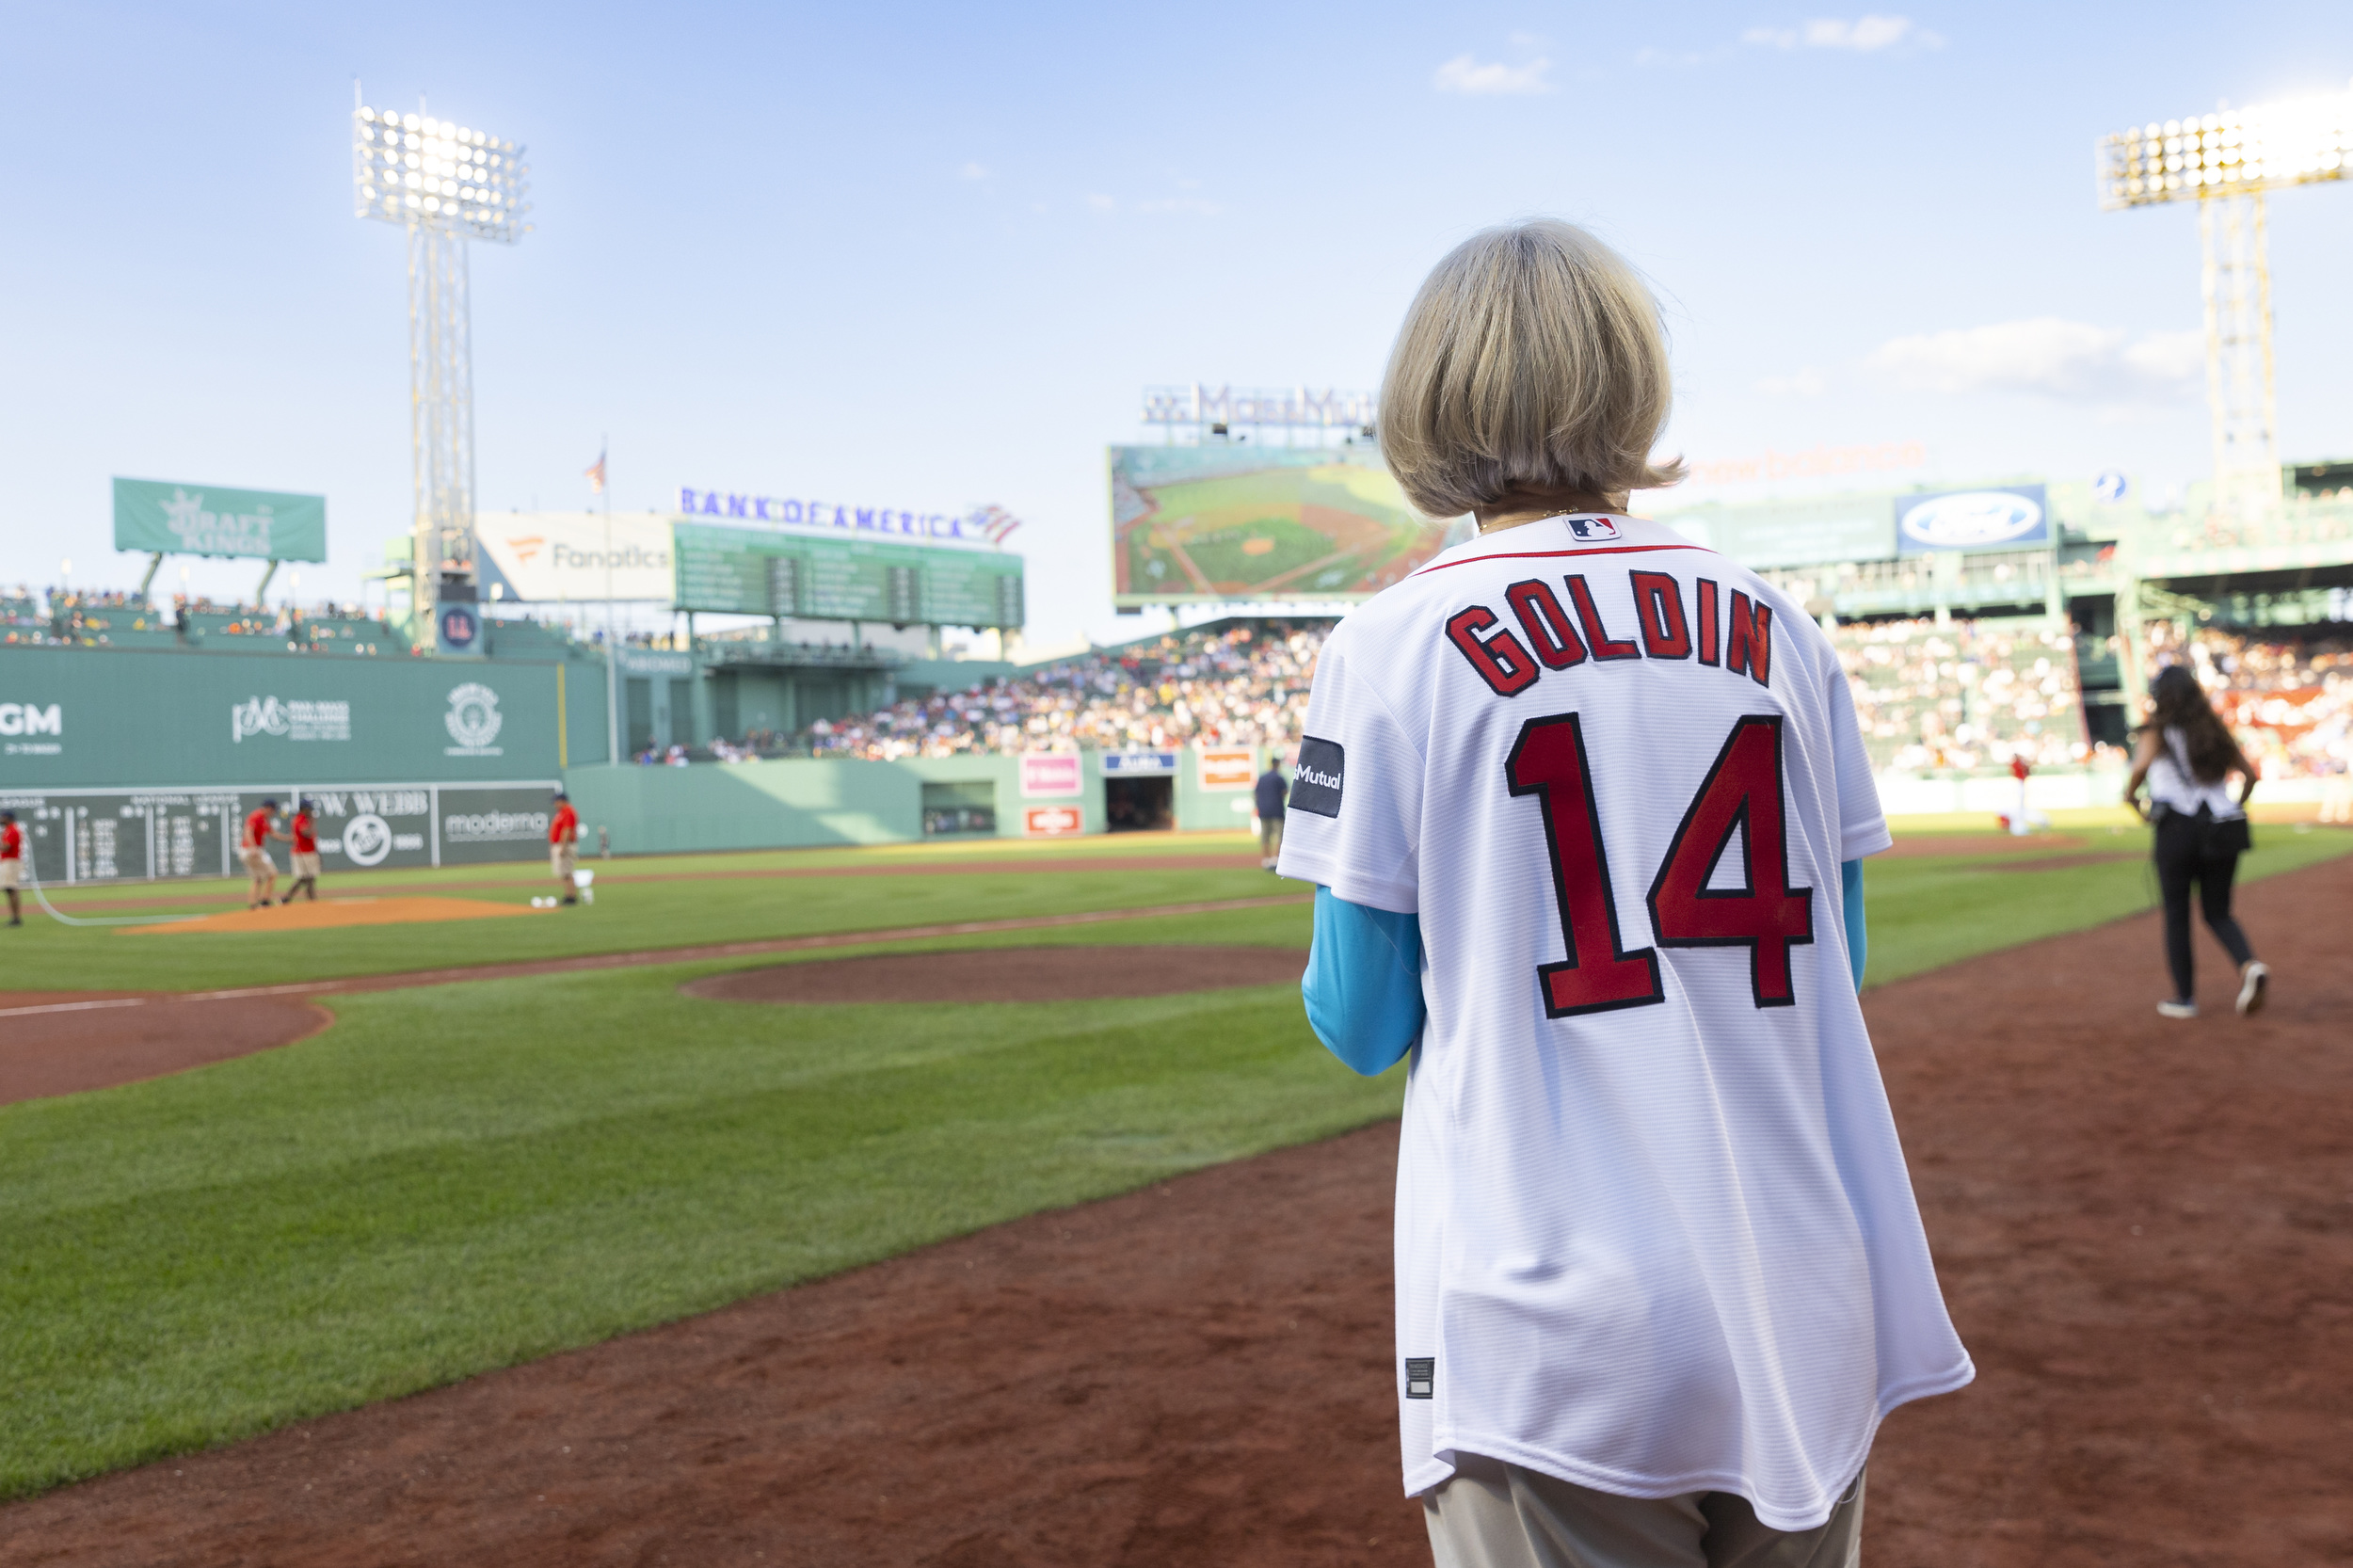 Claudia Goldin before throwing the first pitch at Fenway Park.